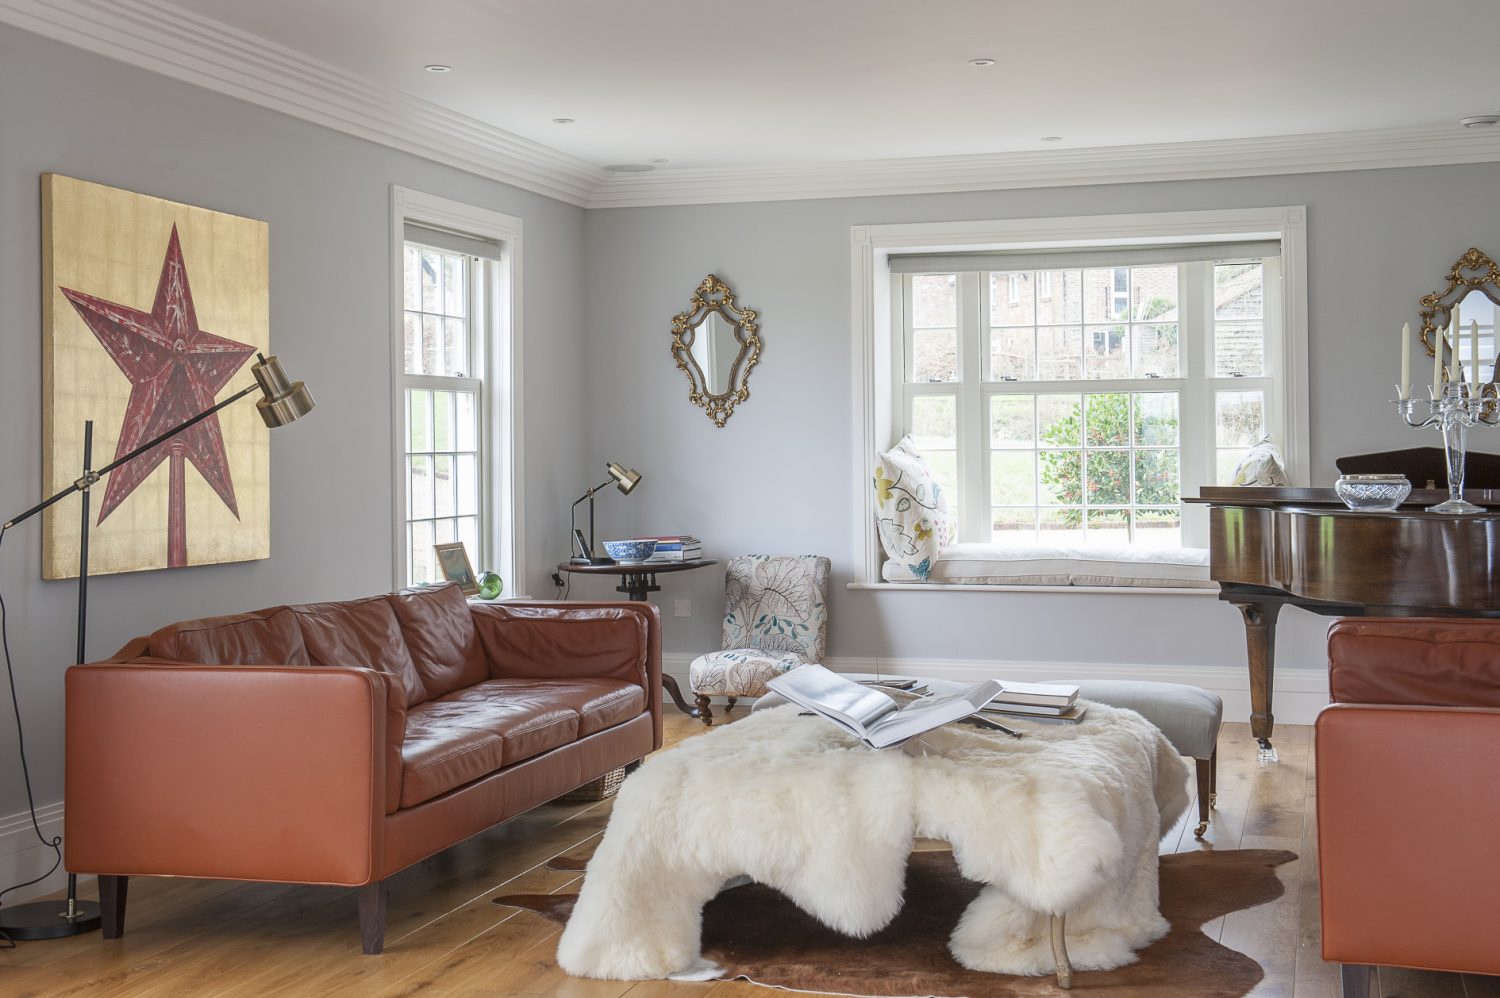 The opposite end of the living room-cum-drawing room has a different feel; perhaps more ‘rustic modern’, with luxurious sheepskins and retro leather sofas